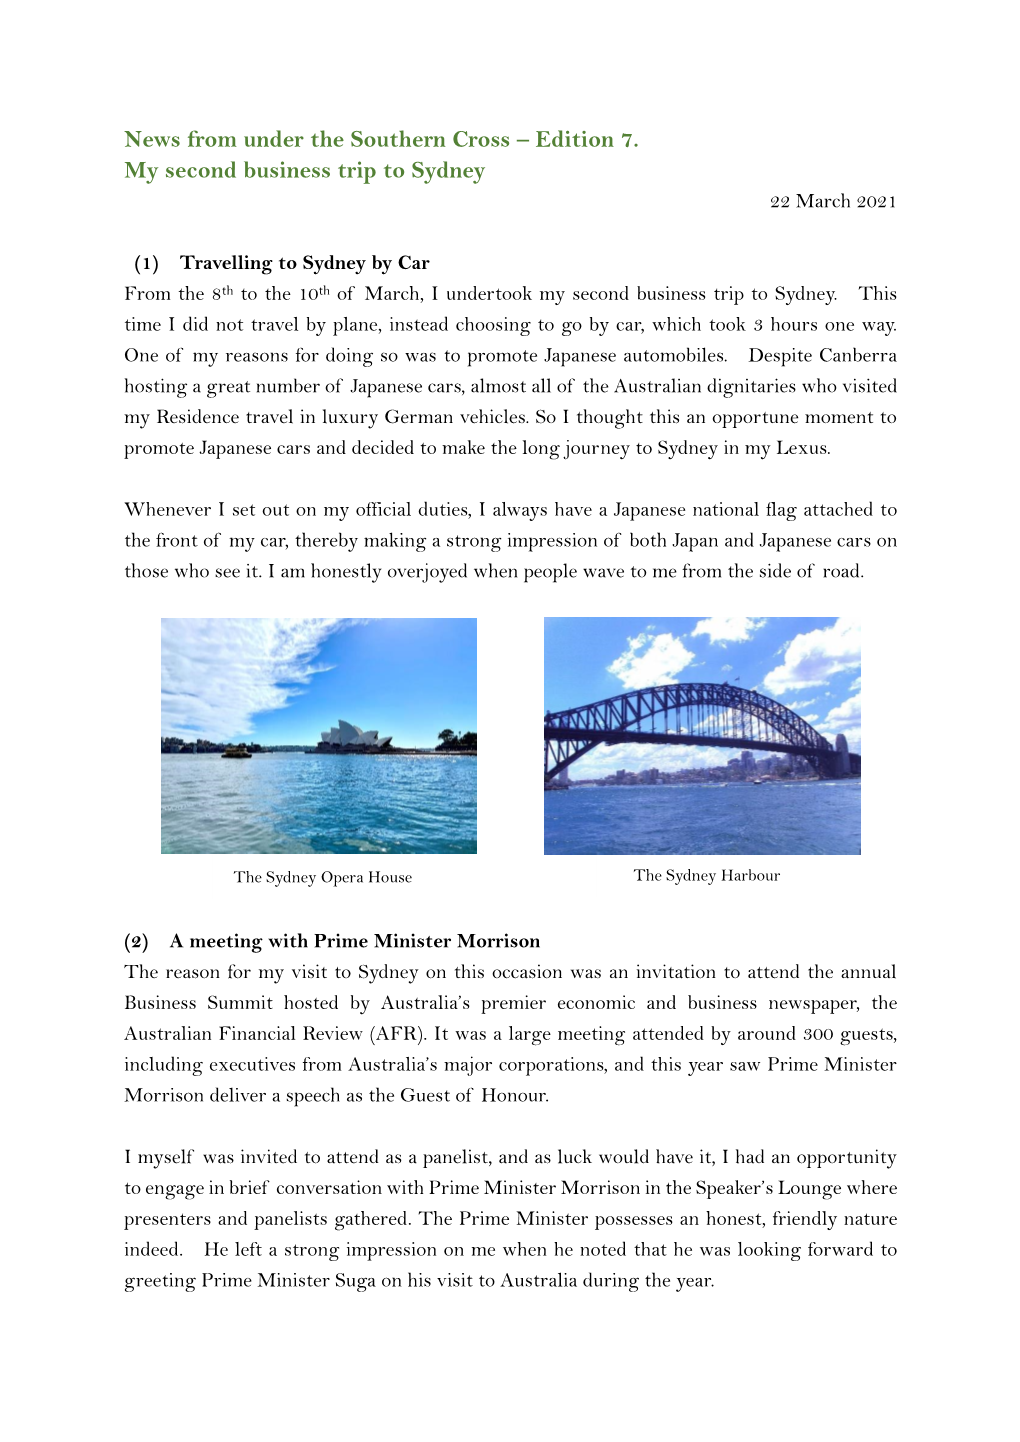 News from Under the Southern Cross – Edition 7. My Second Business Trip to Sydney 22 March 2021